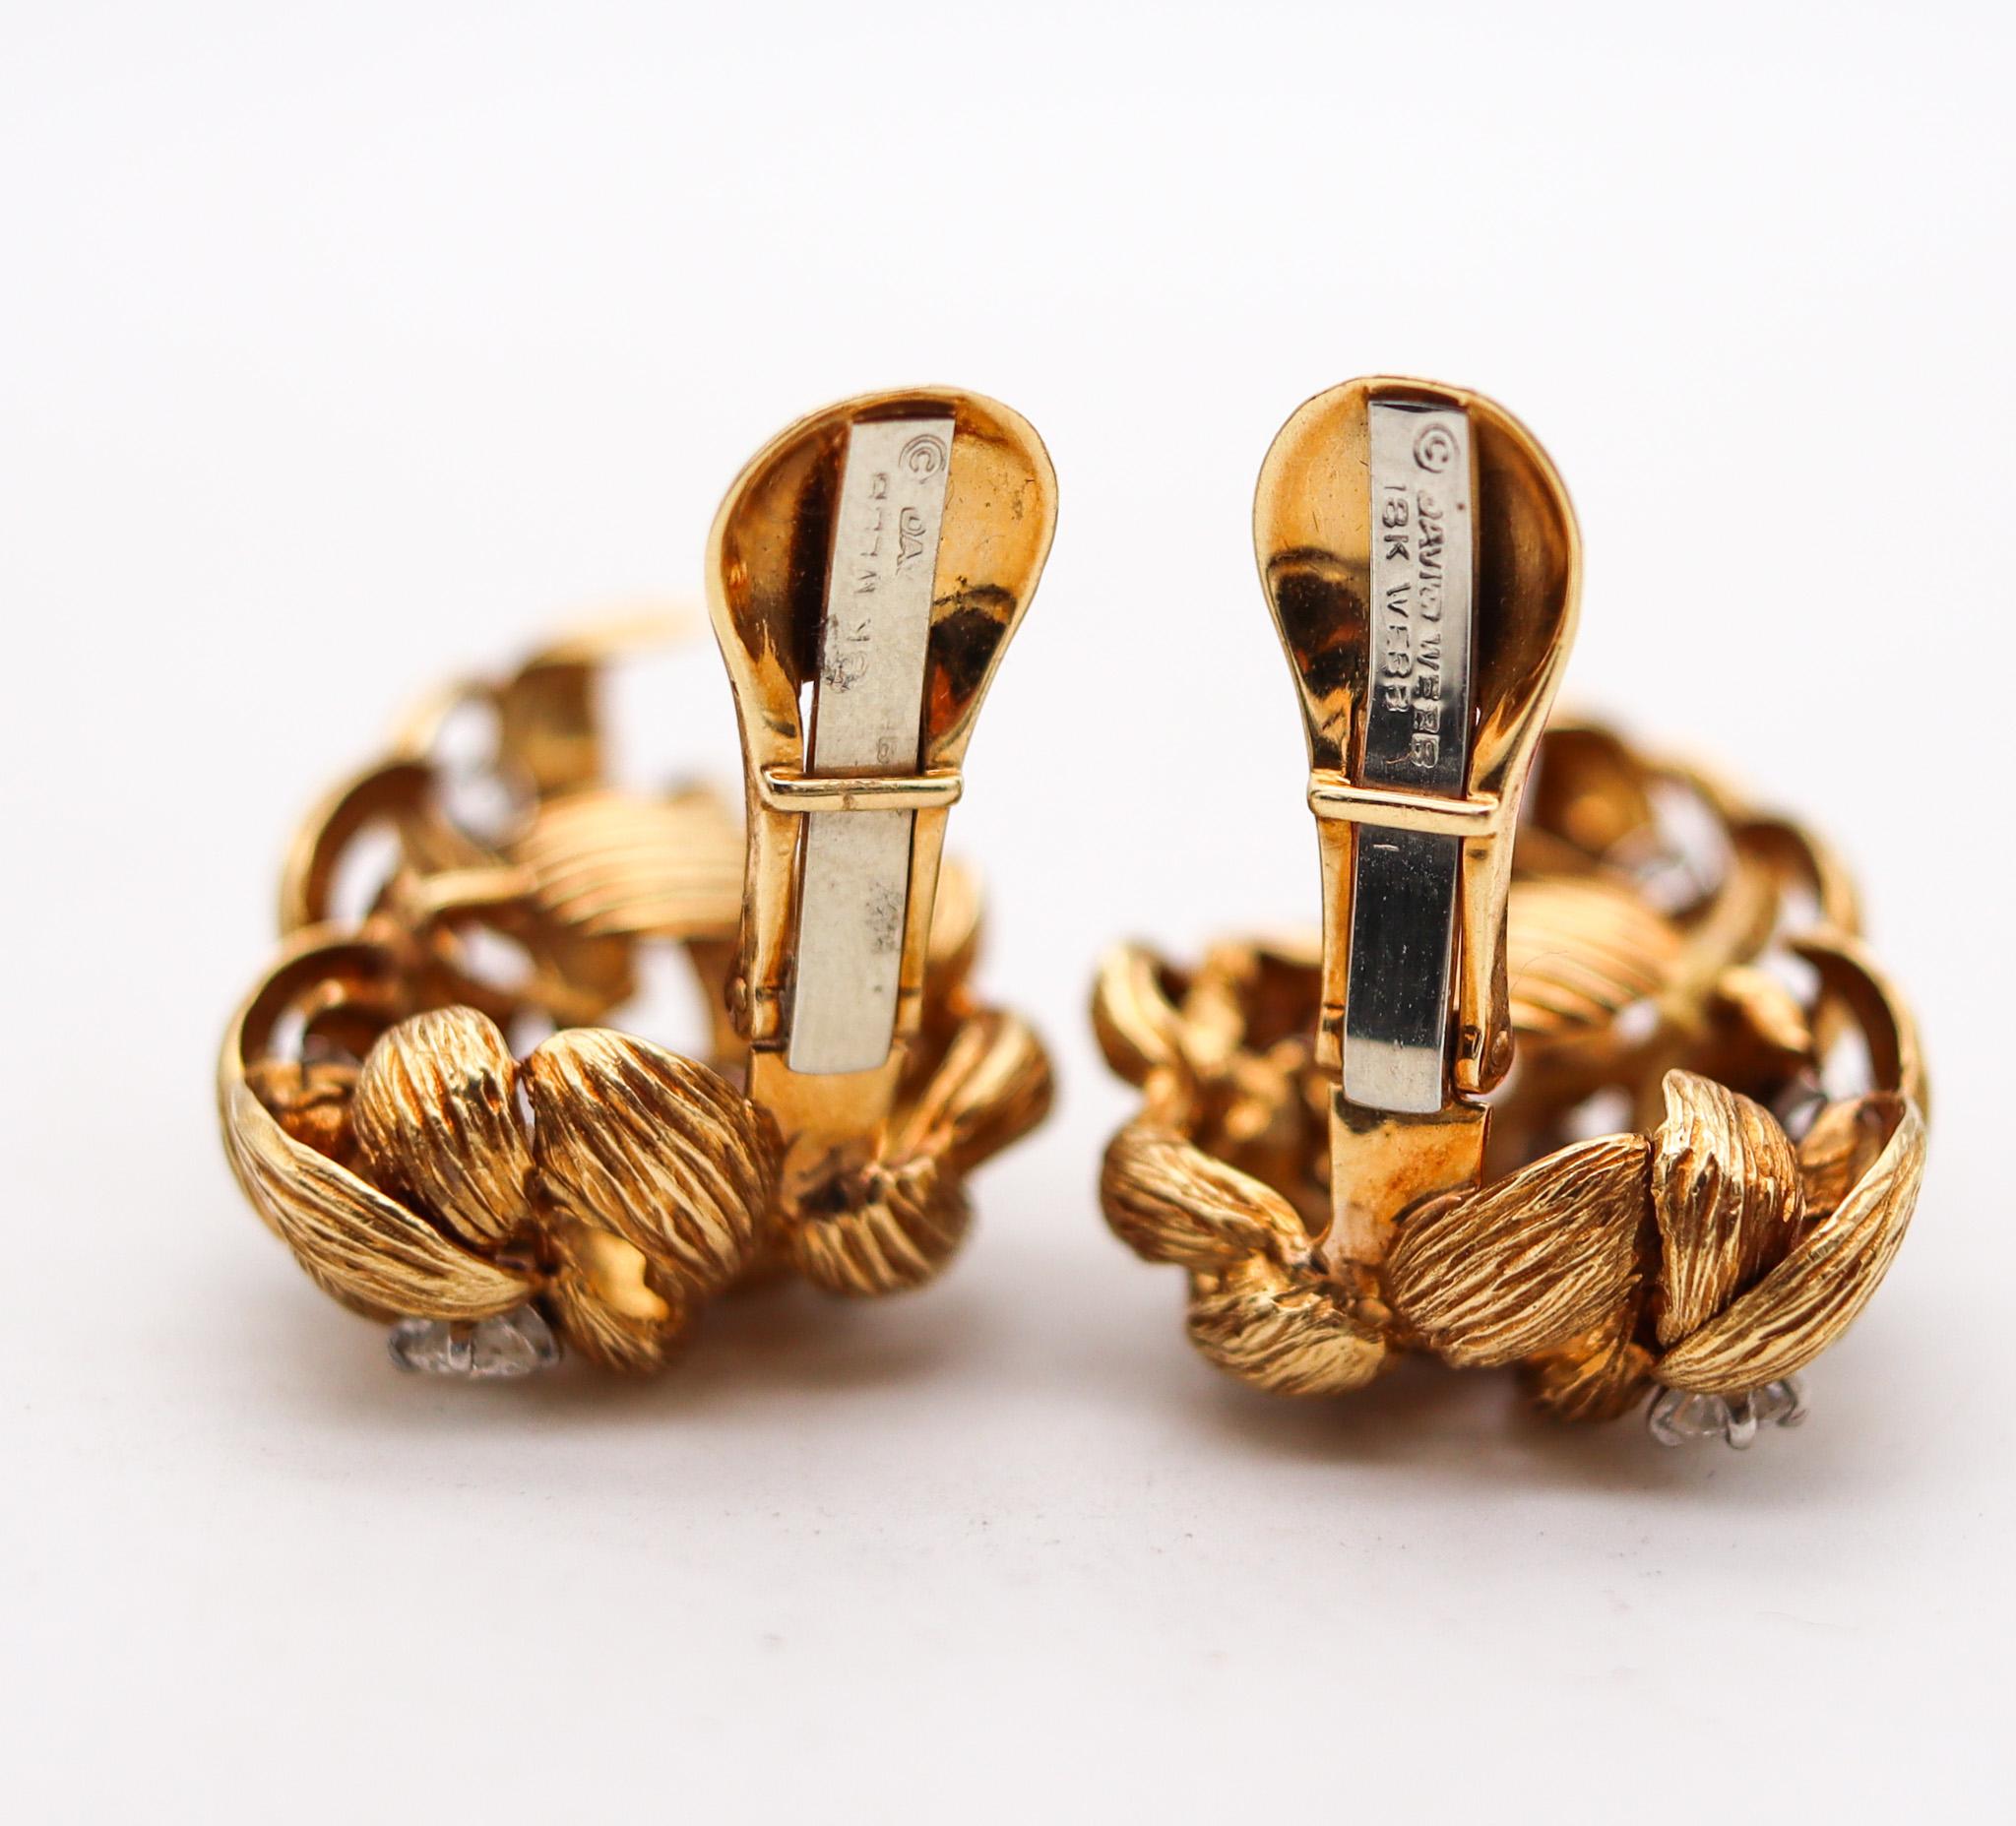 Modernist David Webb 1960 Classic Floral Earrings In 18Kt Gold With 2.24 Ctw In Diamonds For Sale